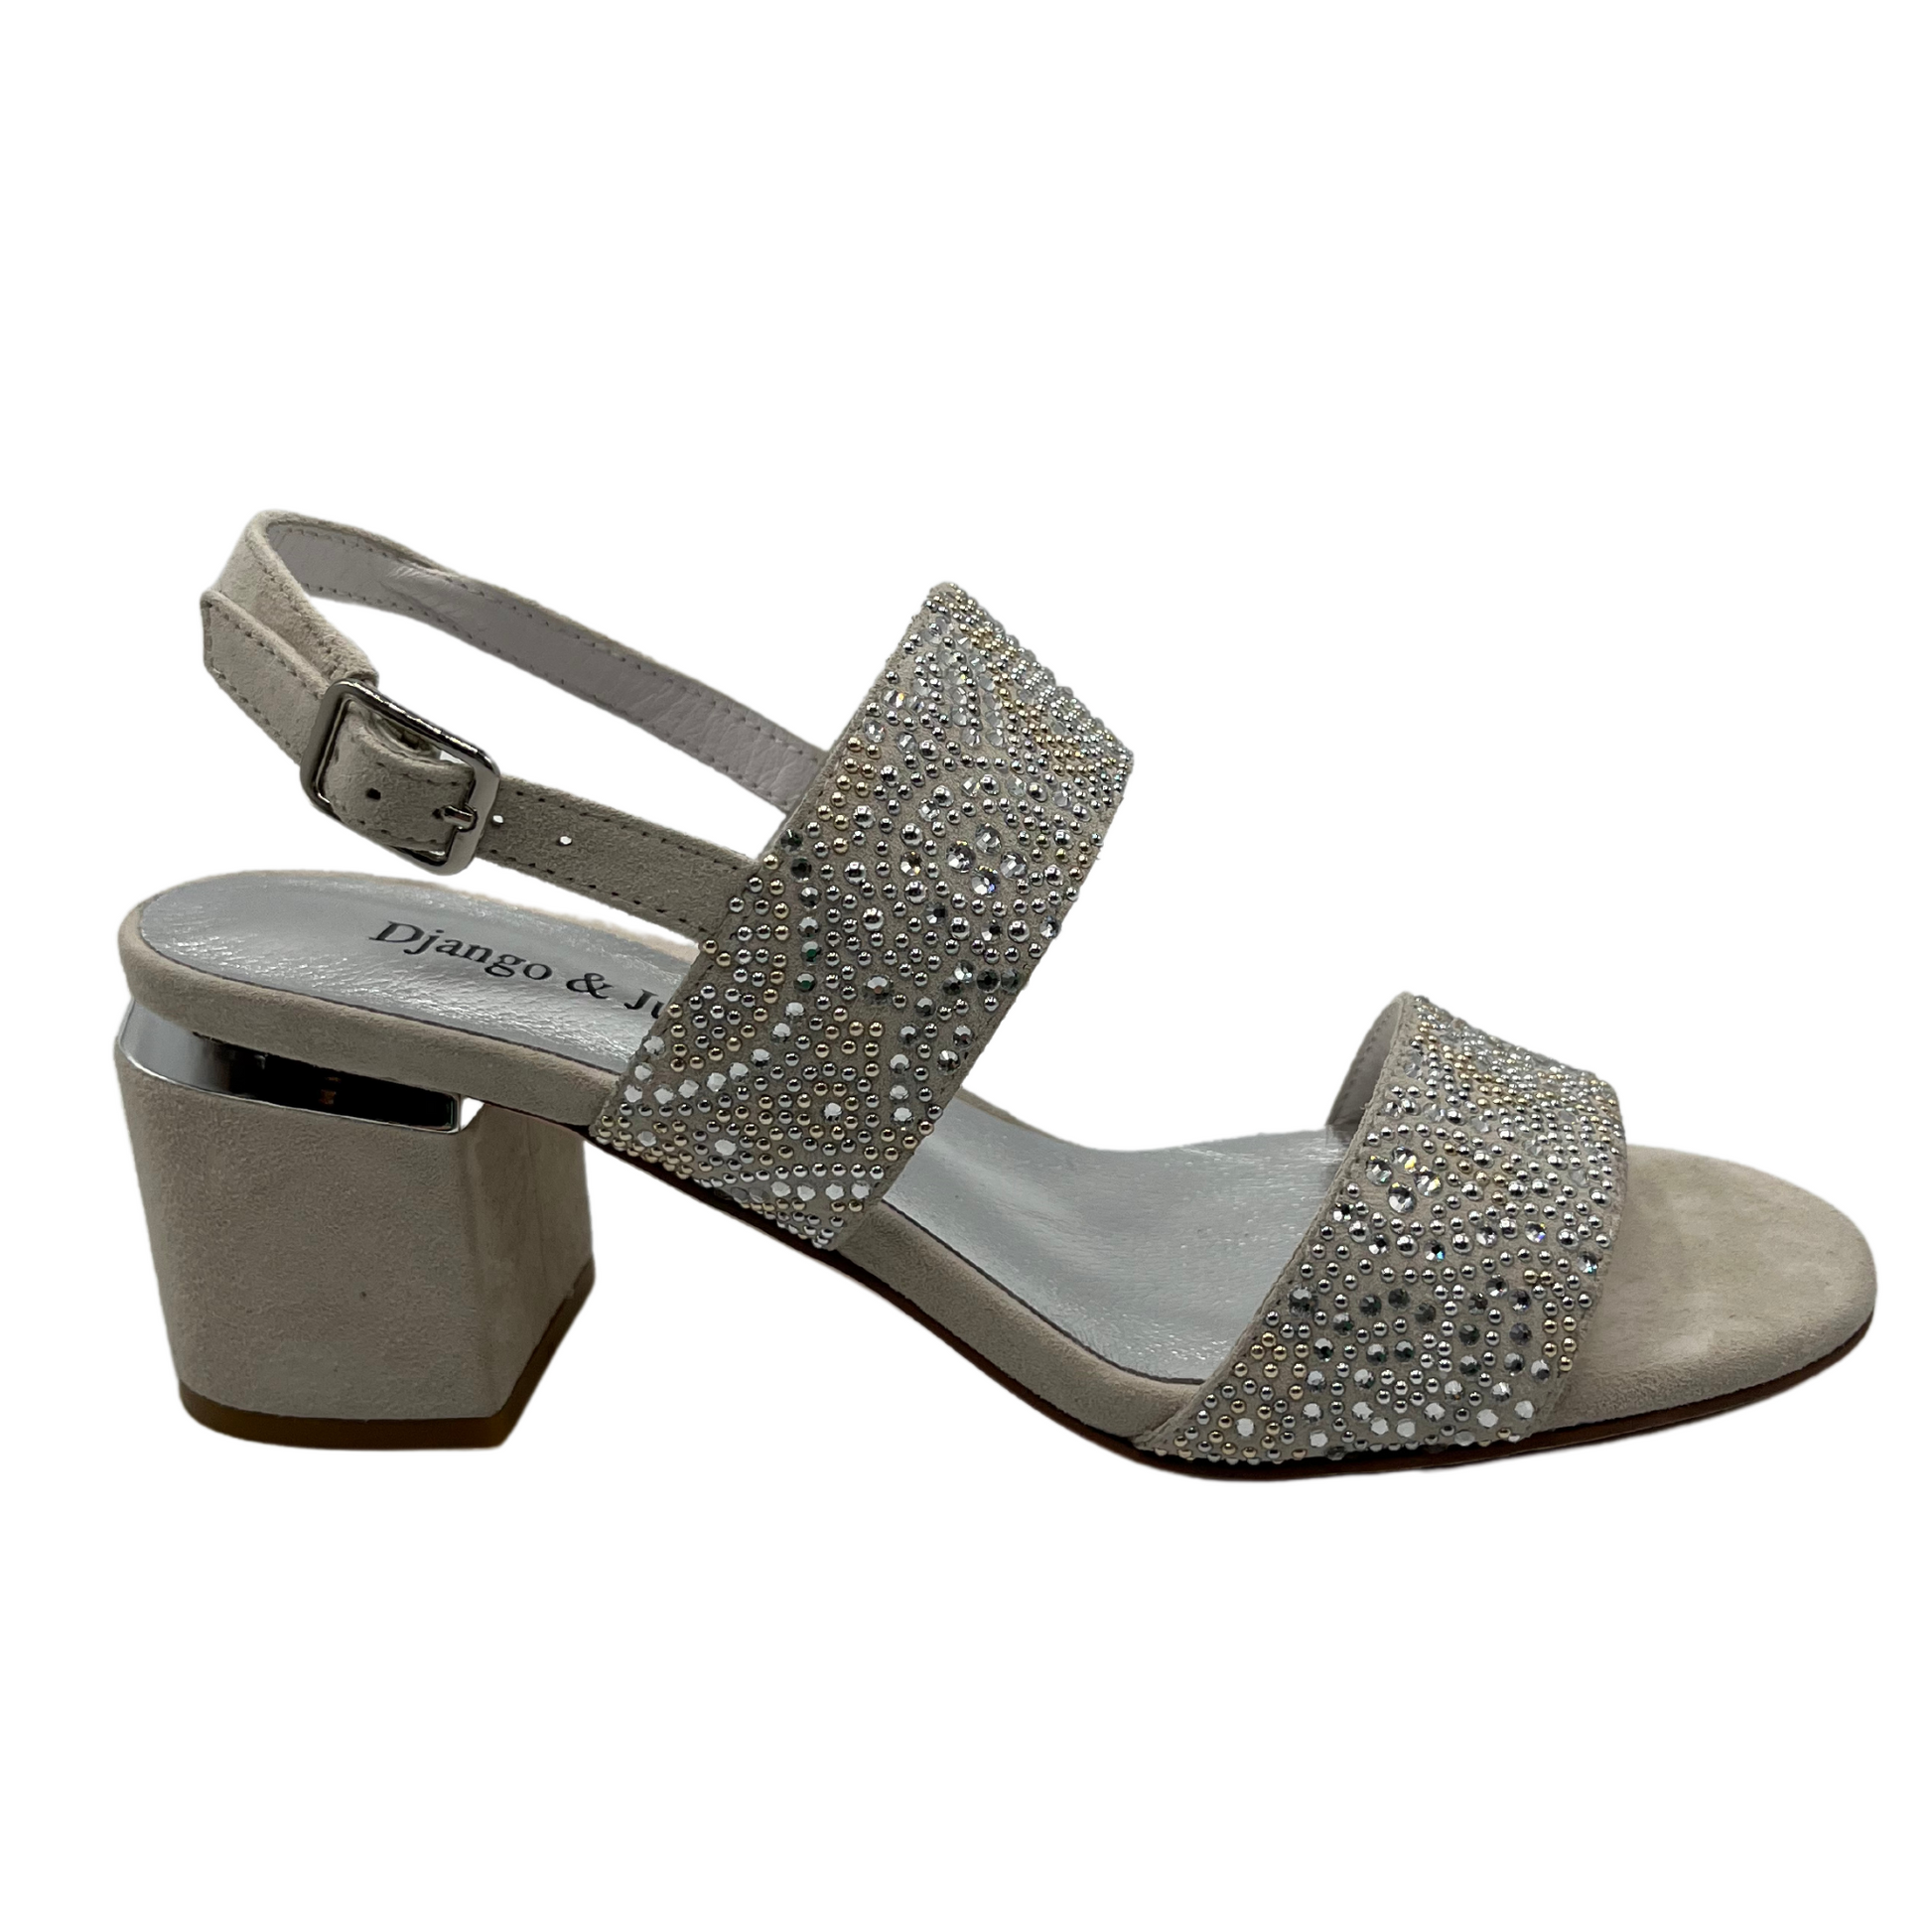 Right facing view of silver suede and leather sandal with beaded details and sling back strap